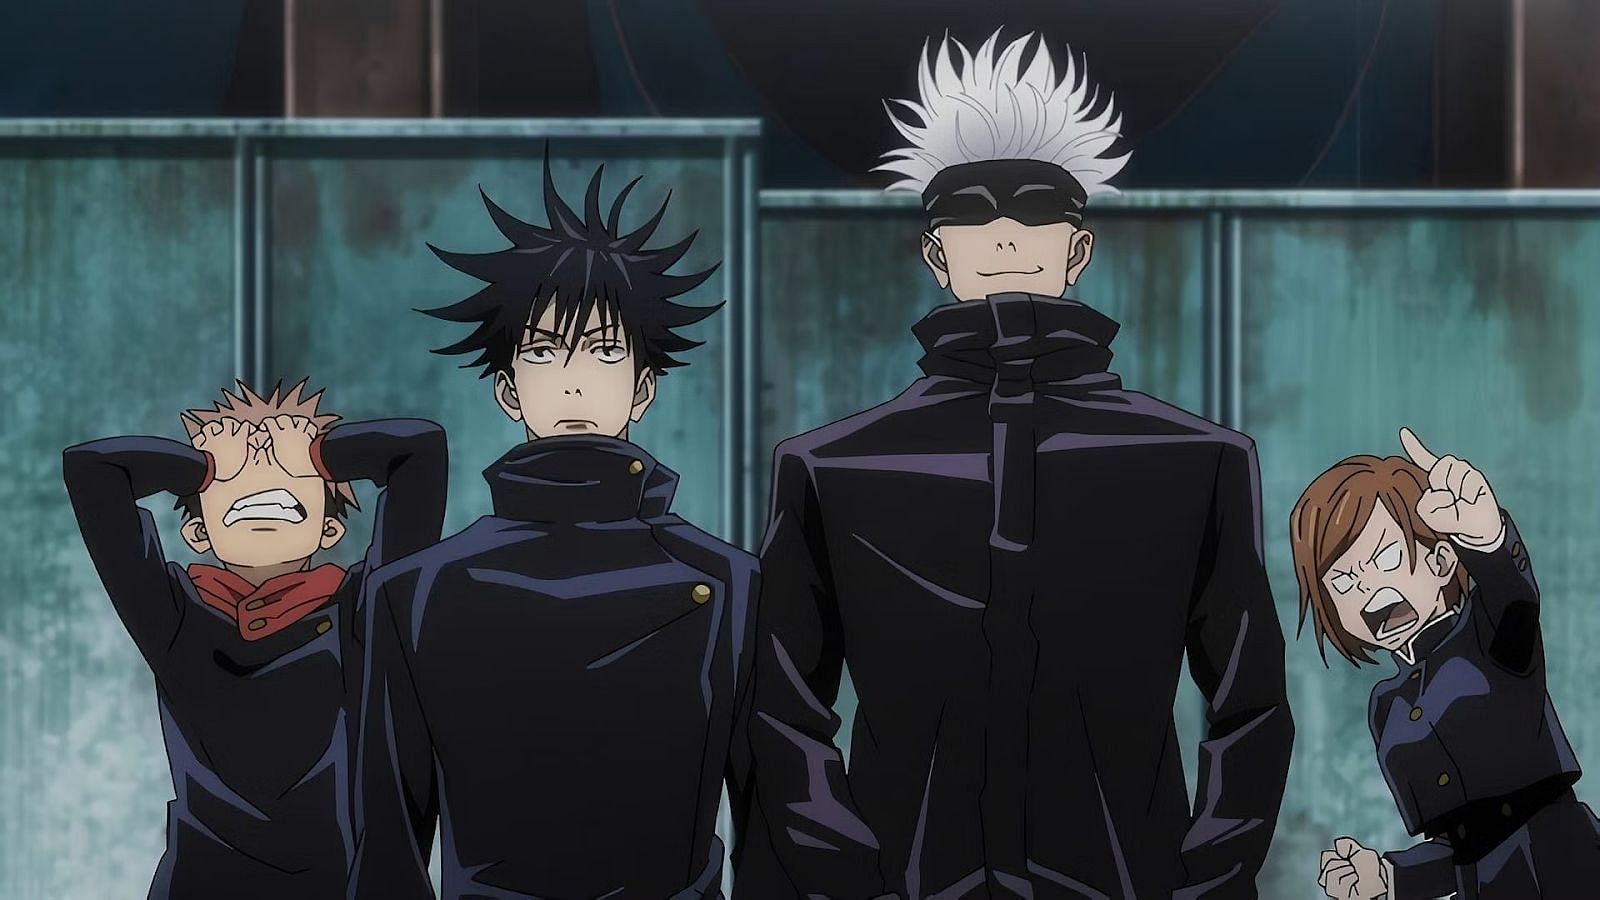 How Many Seasons Of Jujutsu Kaisen Are There?